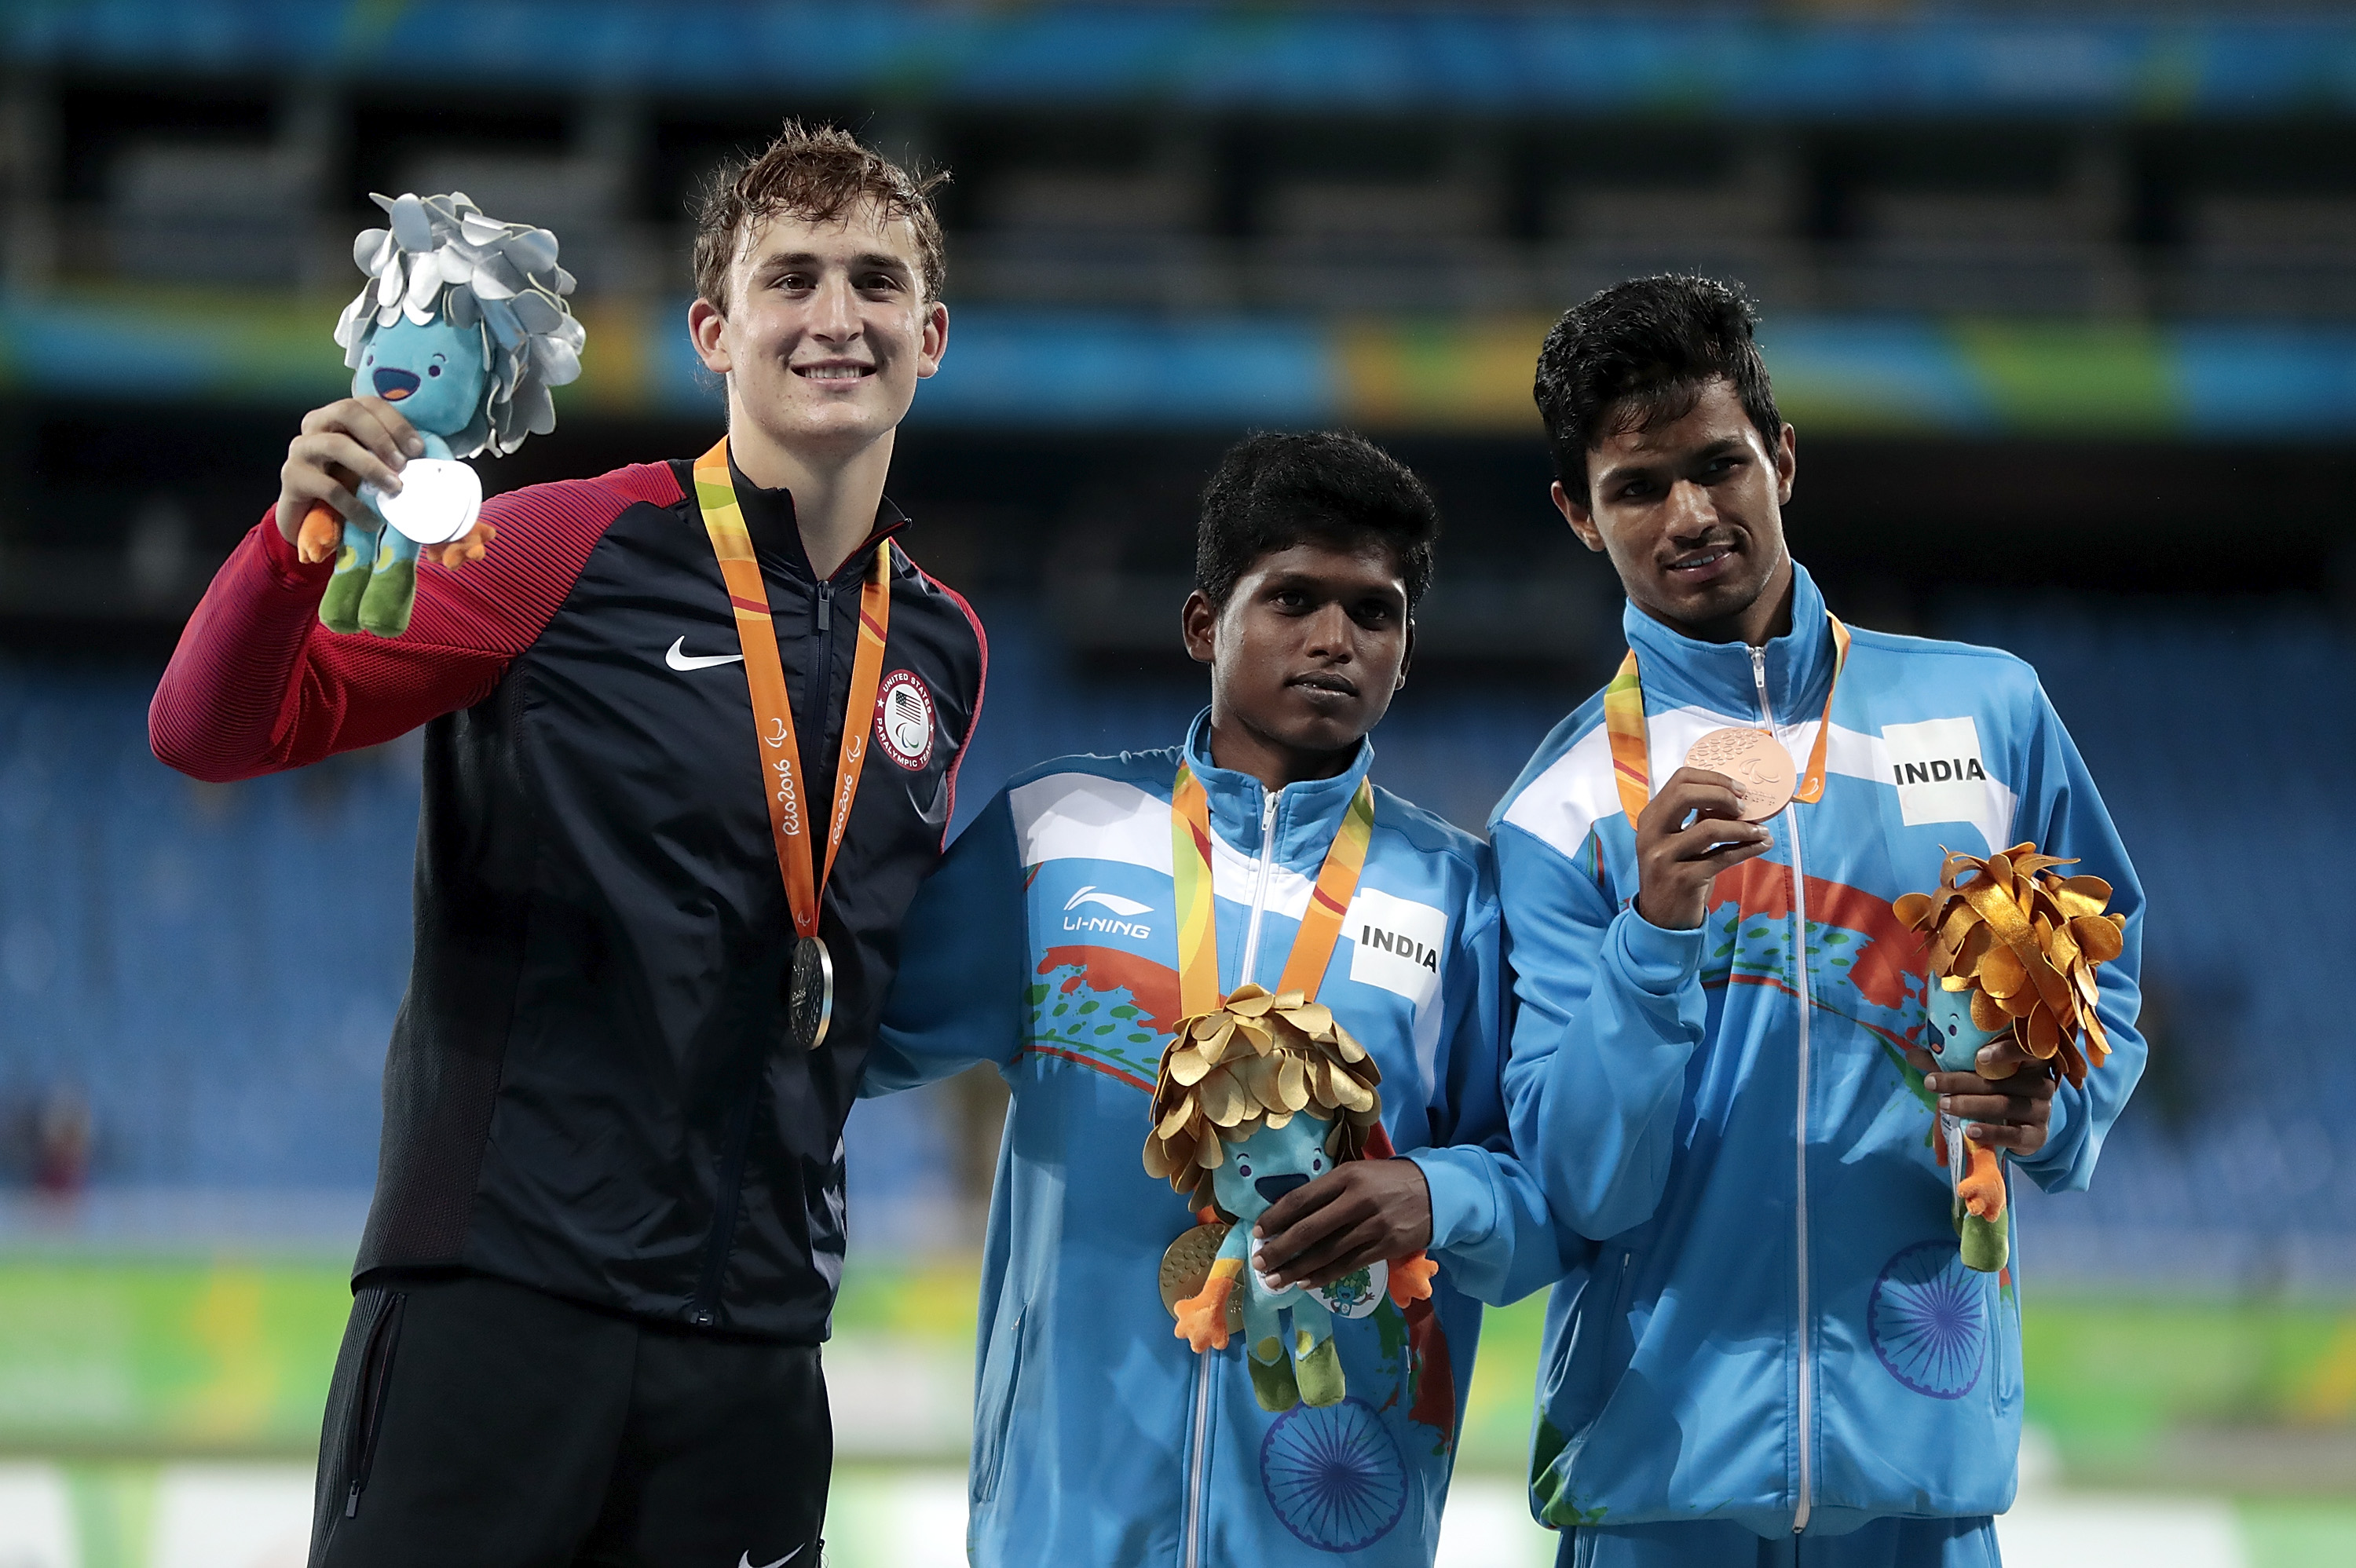 Paralympics 2016 | Twitter reacts to India's first medal at Paralympics